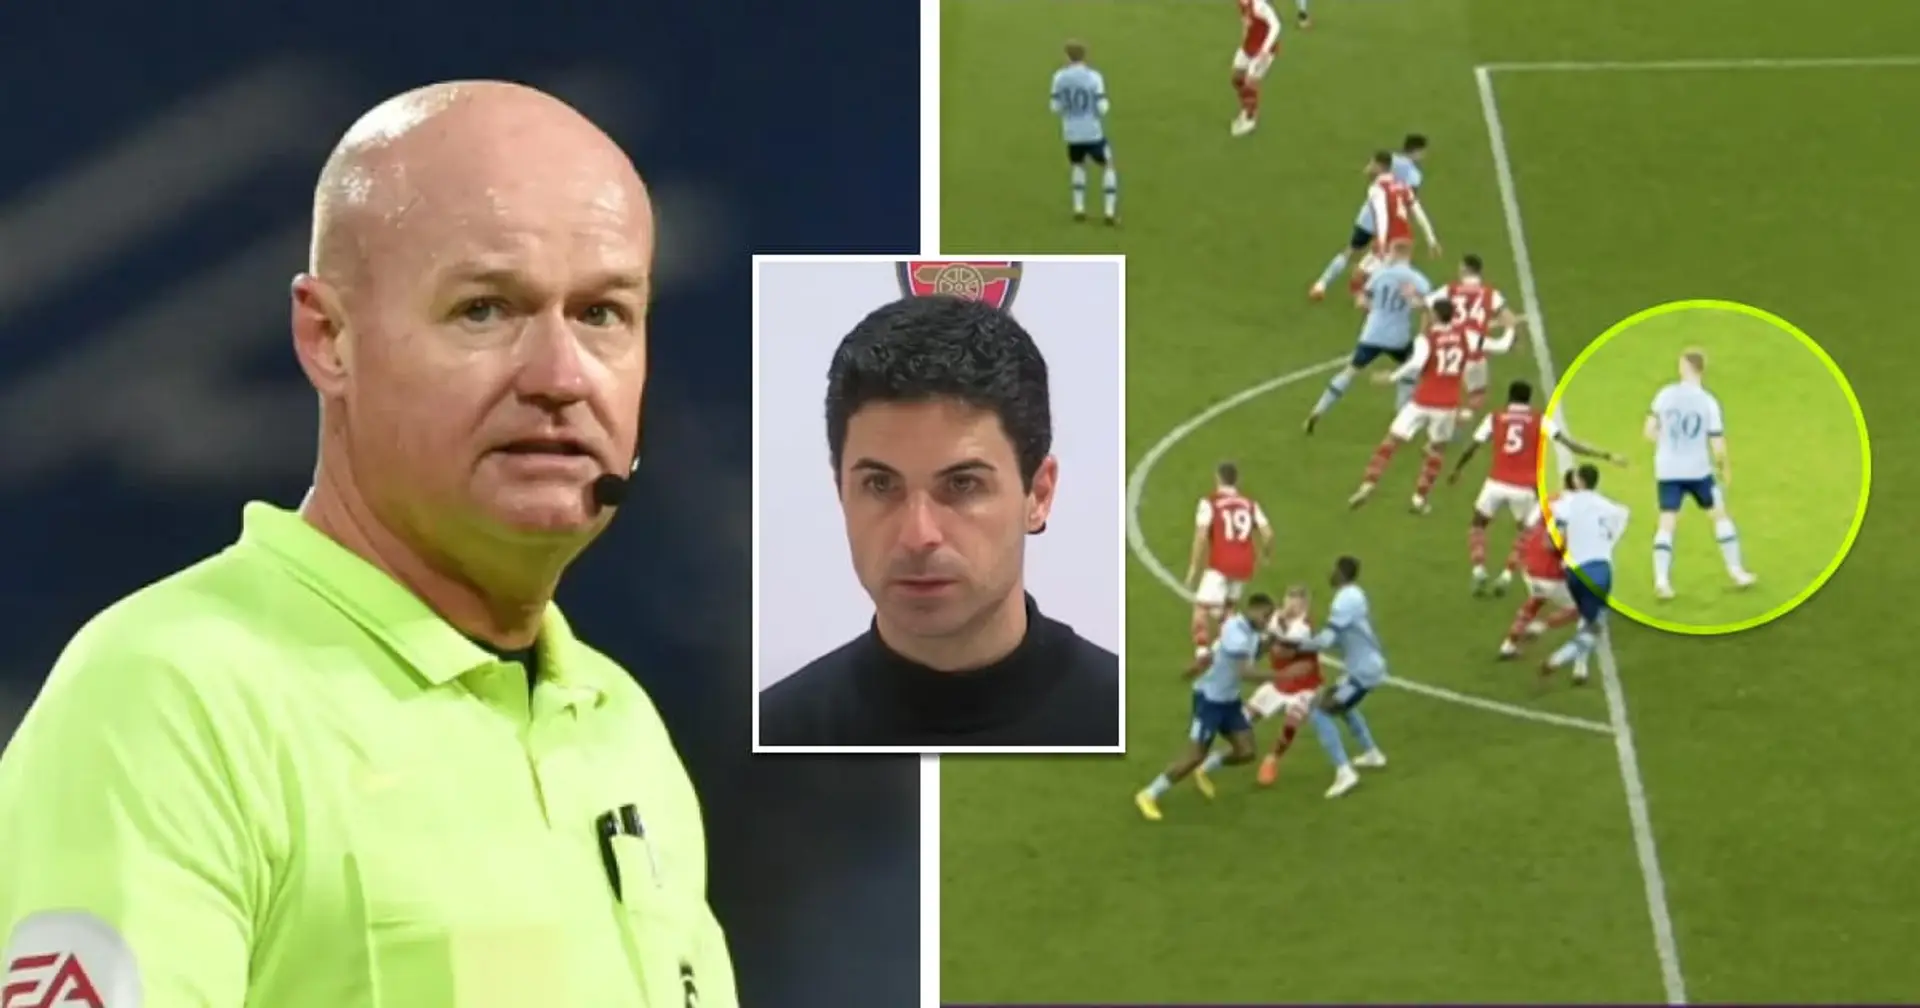 VAR ref Lee Mason 'forgot' to draw the lines for Brentford goal that had to be disallowed